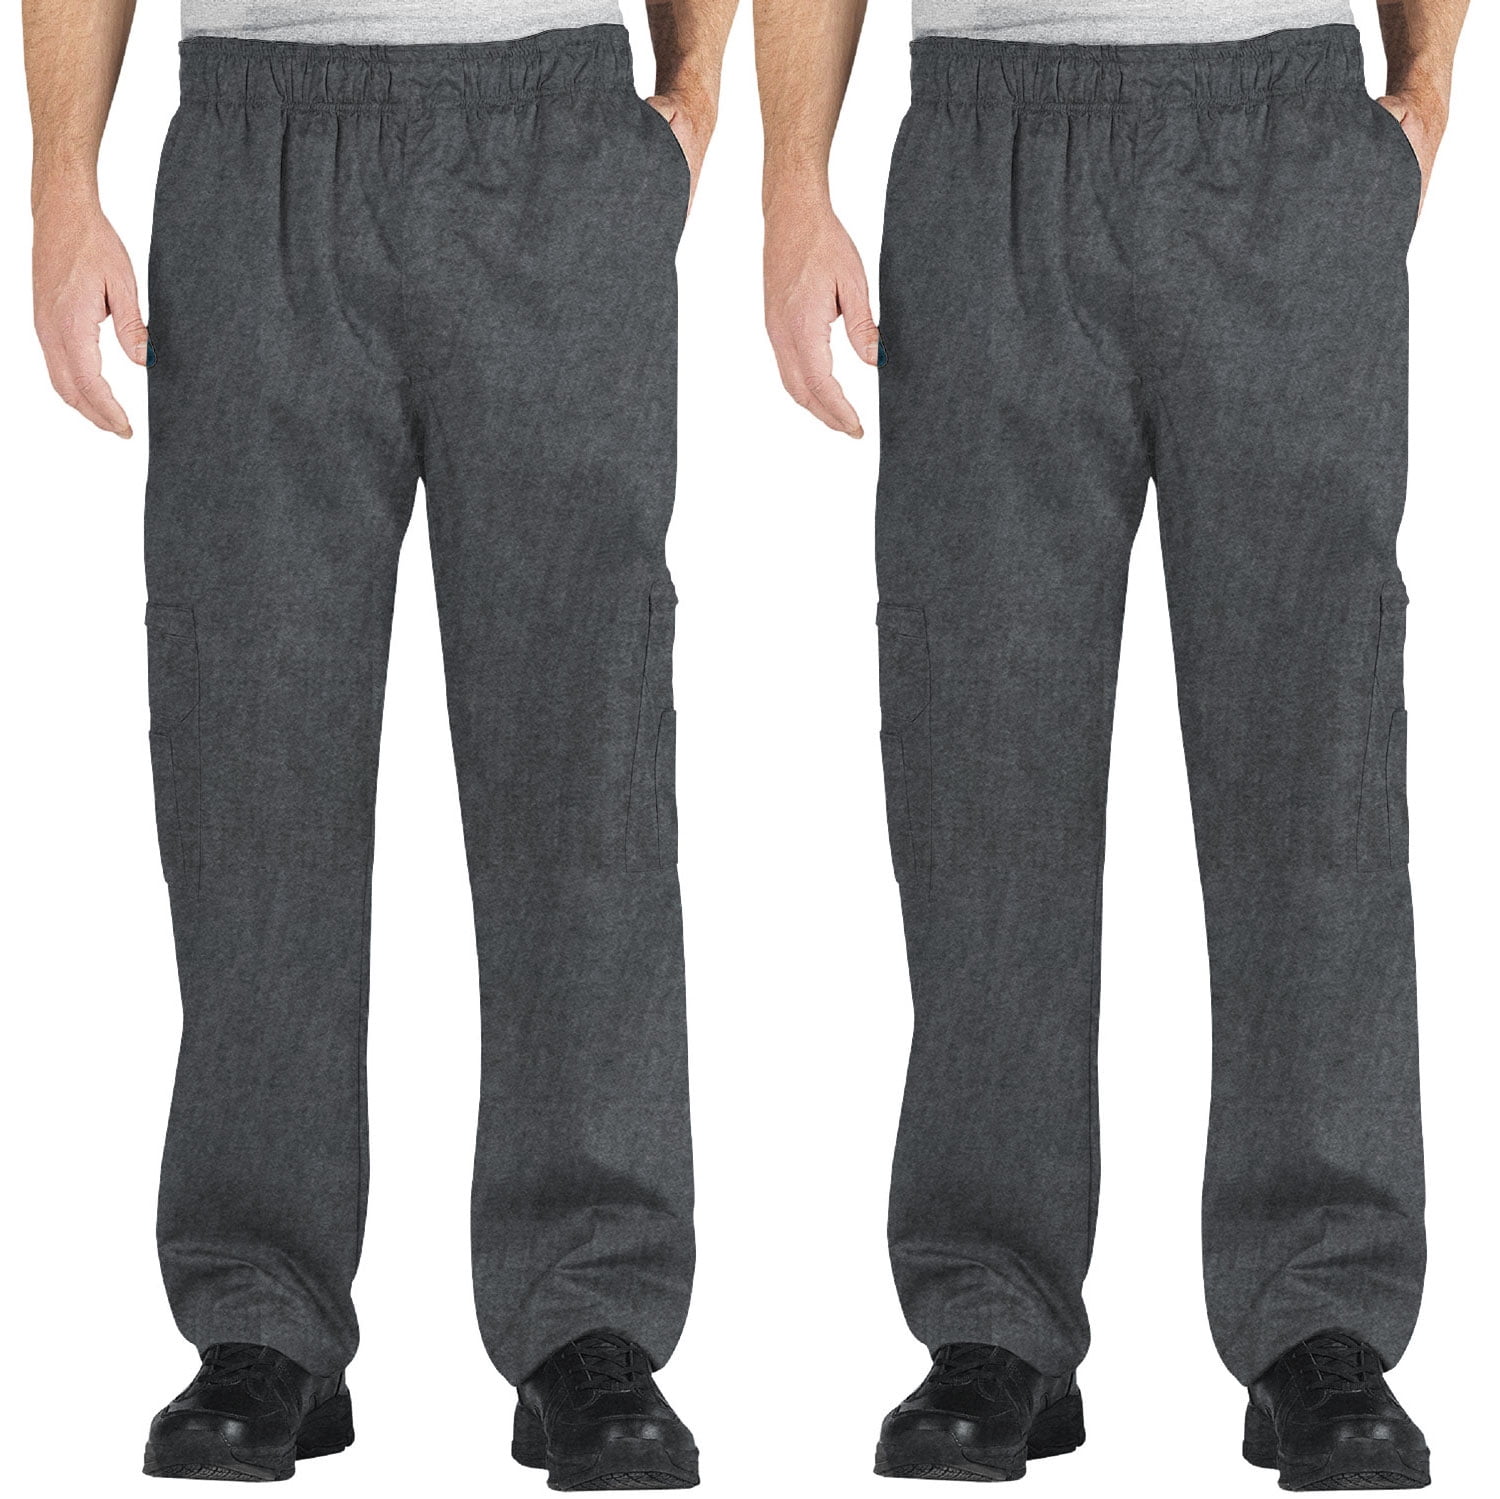 Chefwear 3200-30 Cargo Chef Pant Black all sizes XS-5XL NEW! 